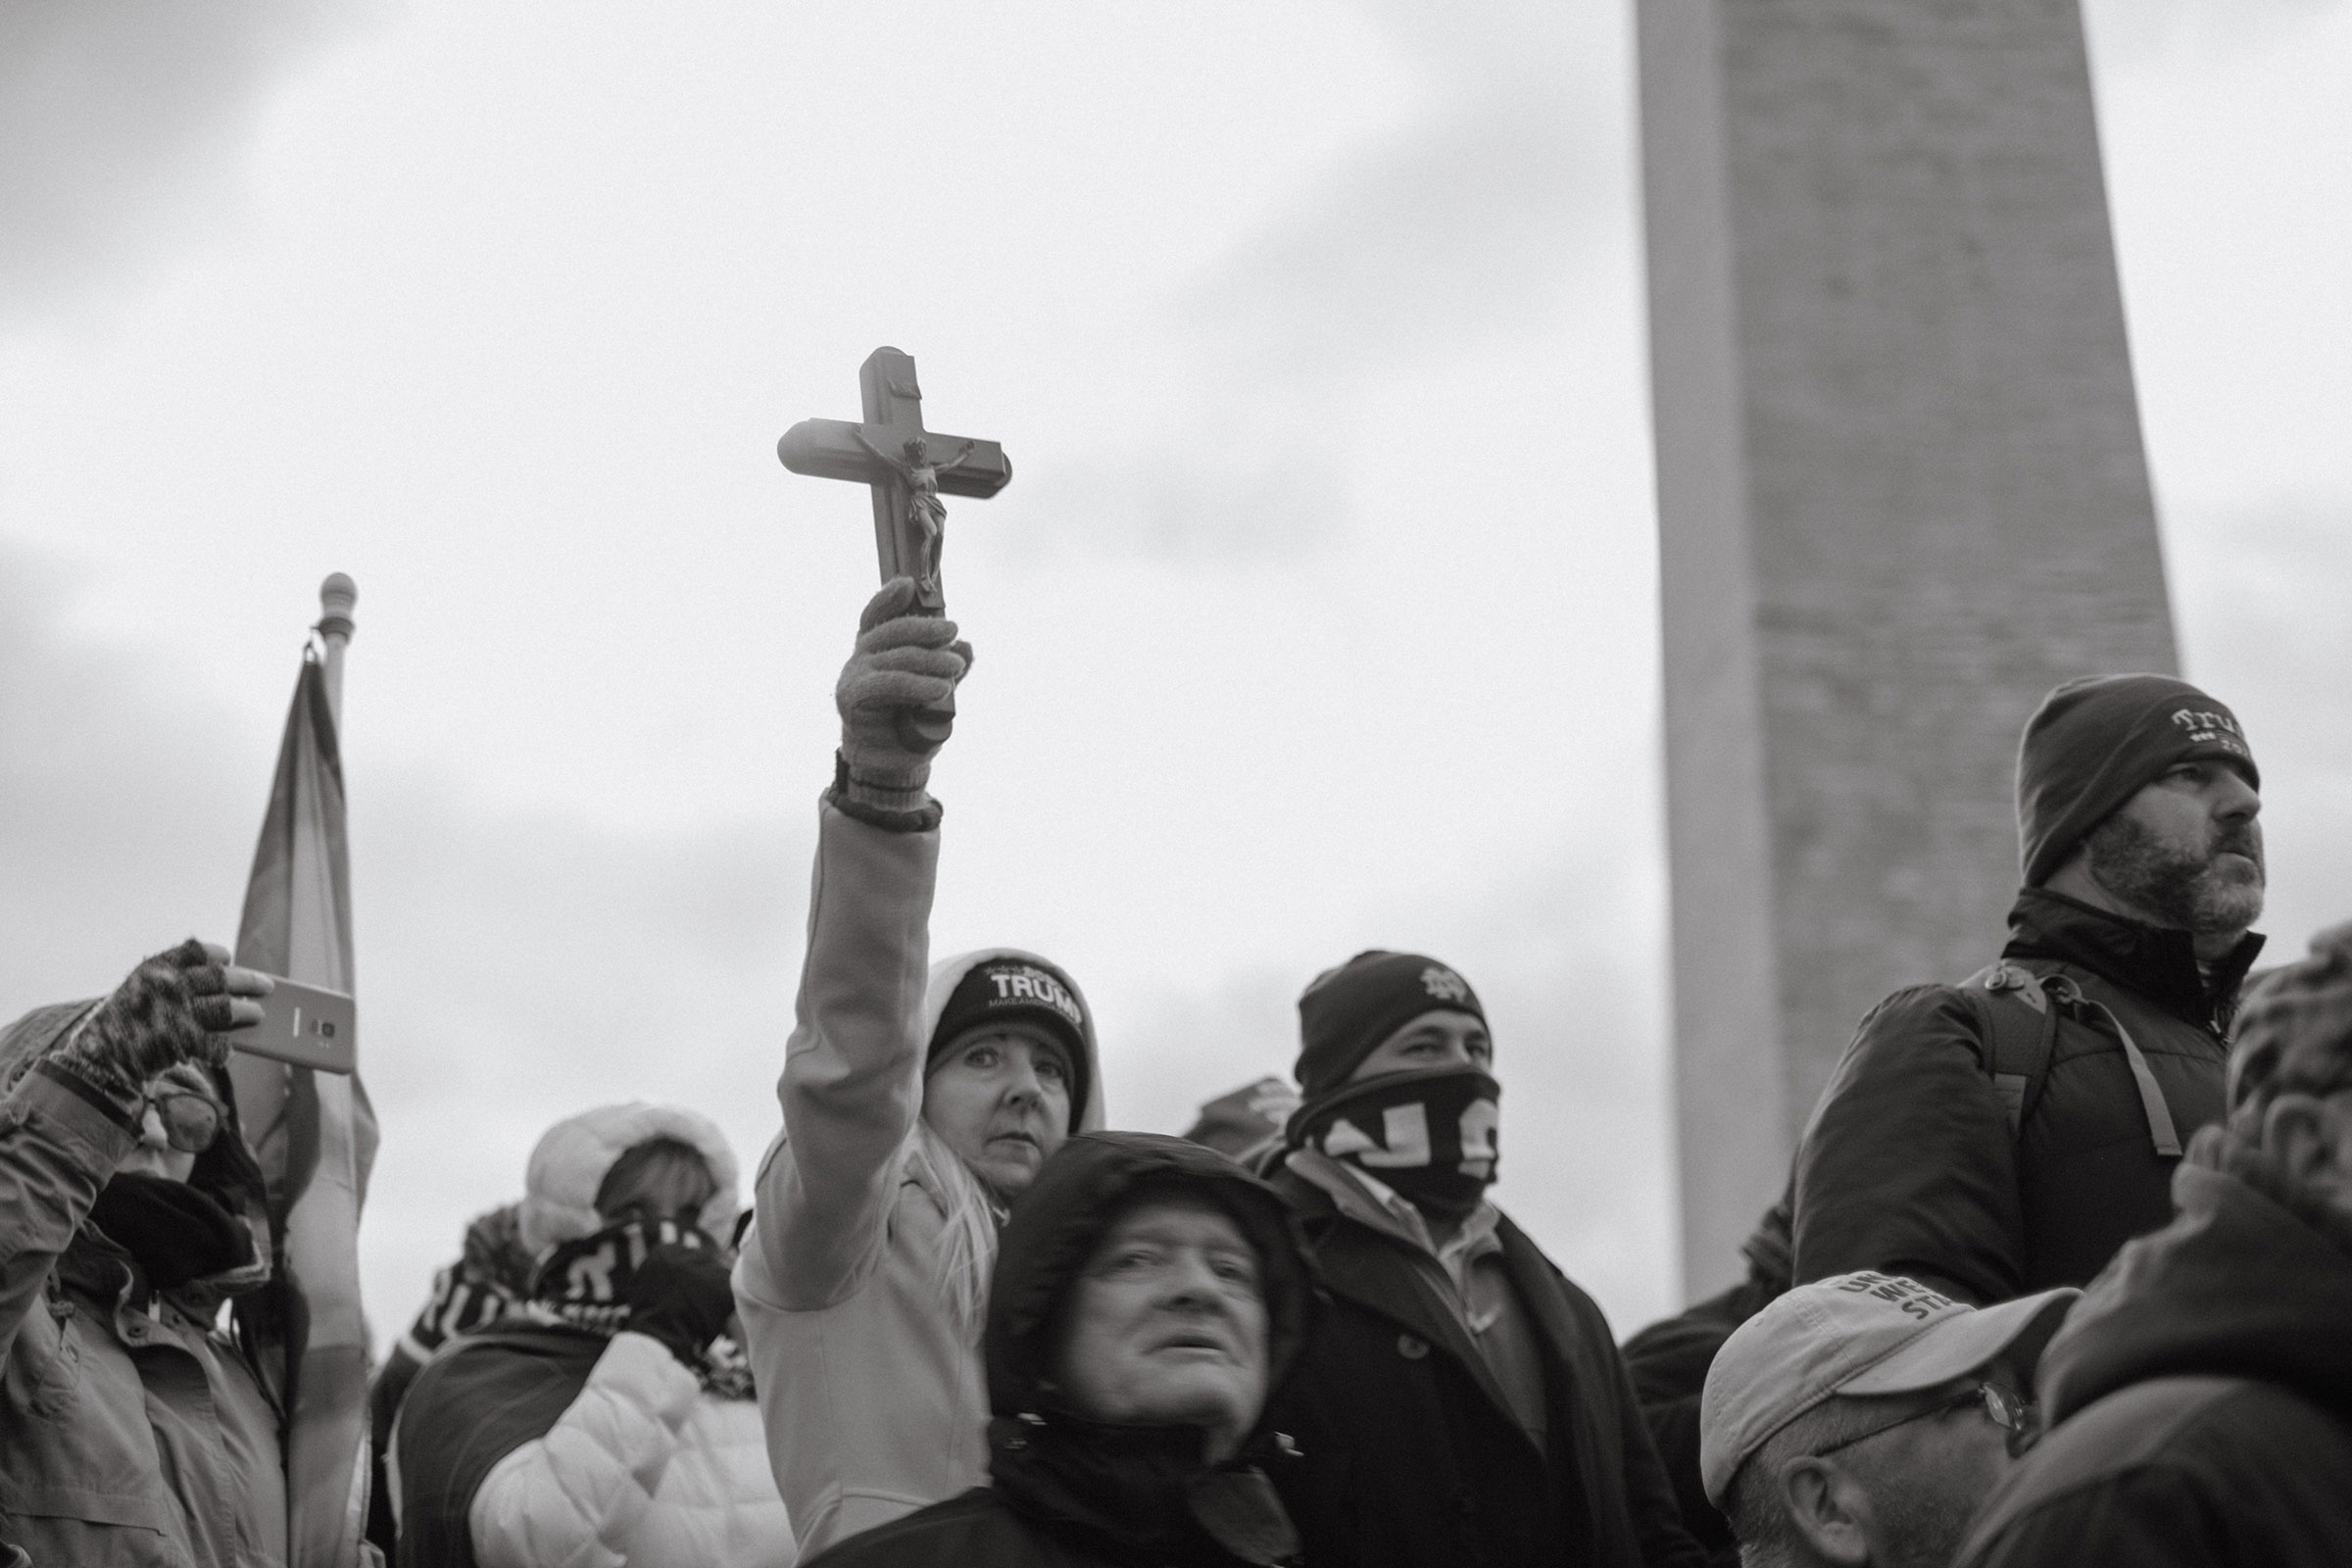 A supporter of President Donald Trump holds up a cross during the 'Stop the Steal' rally in Washington on Jan. 6, 2021. (Christopher Lee for TIME)